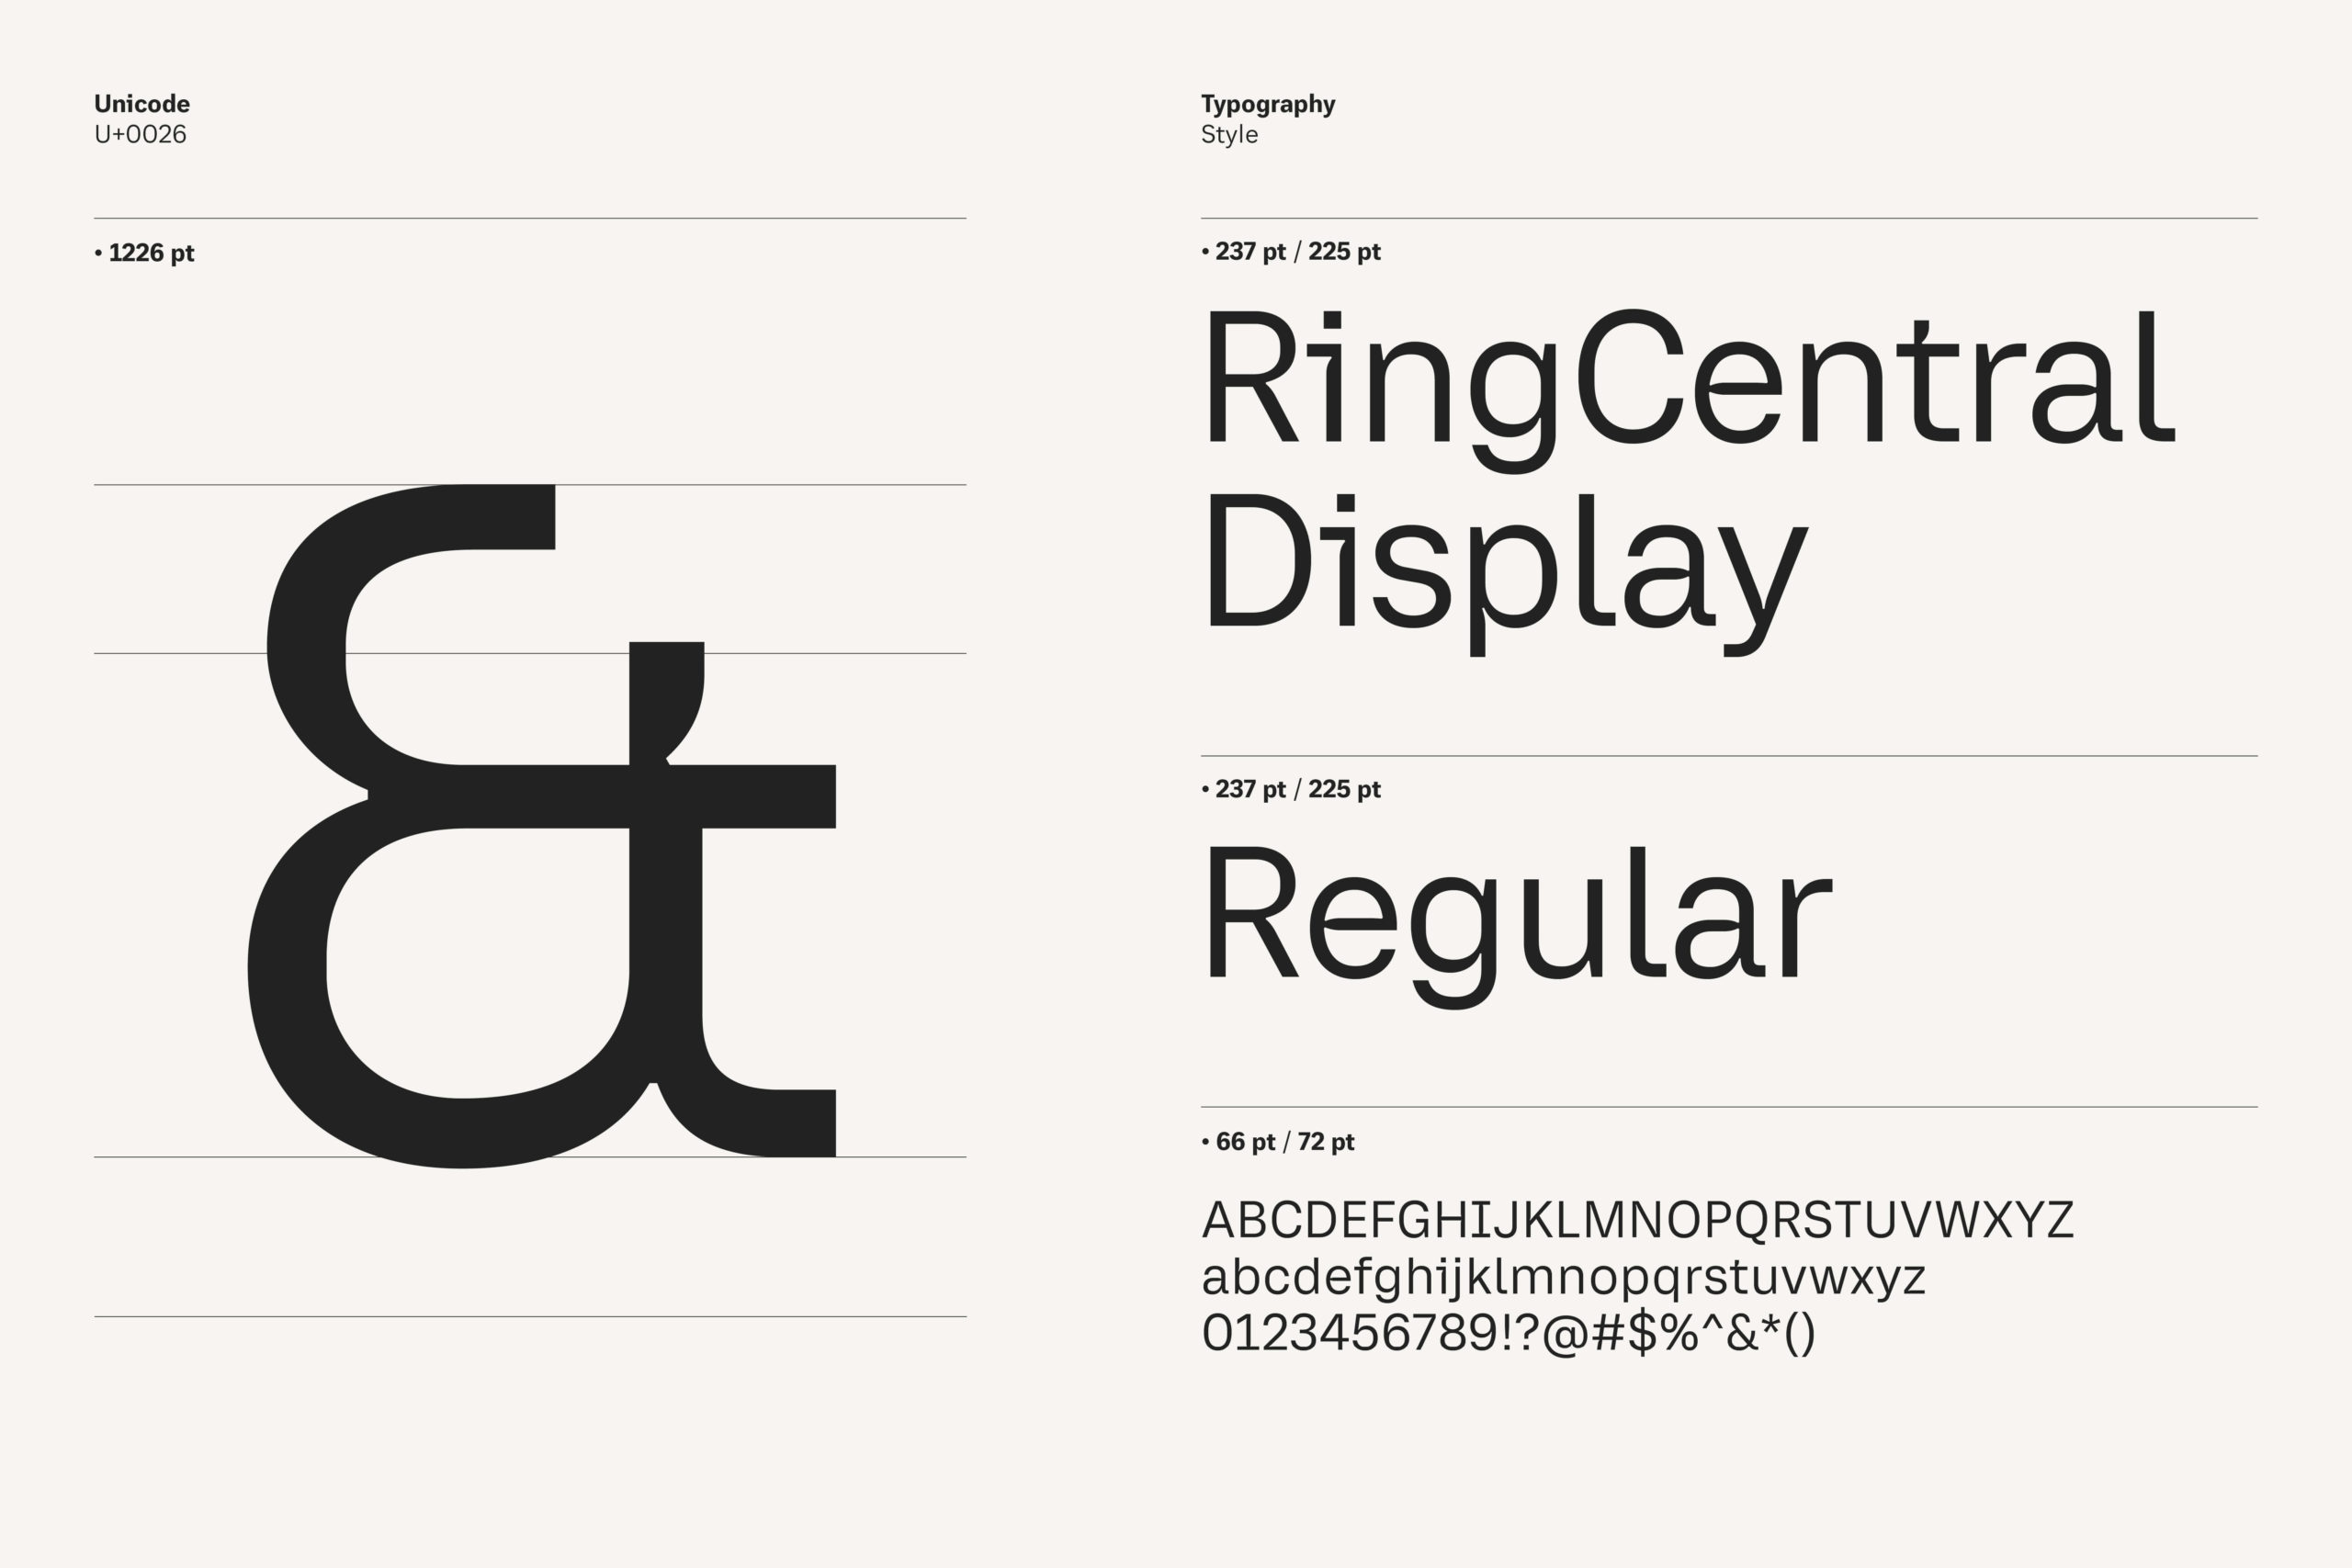 RingCentral Display_Typeface_09142218